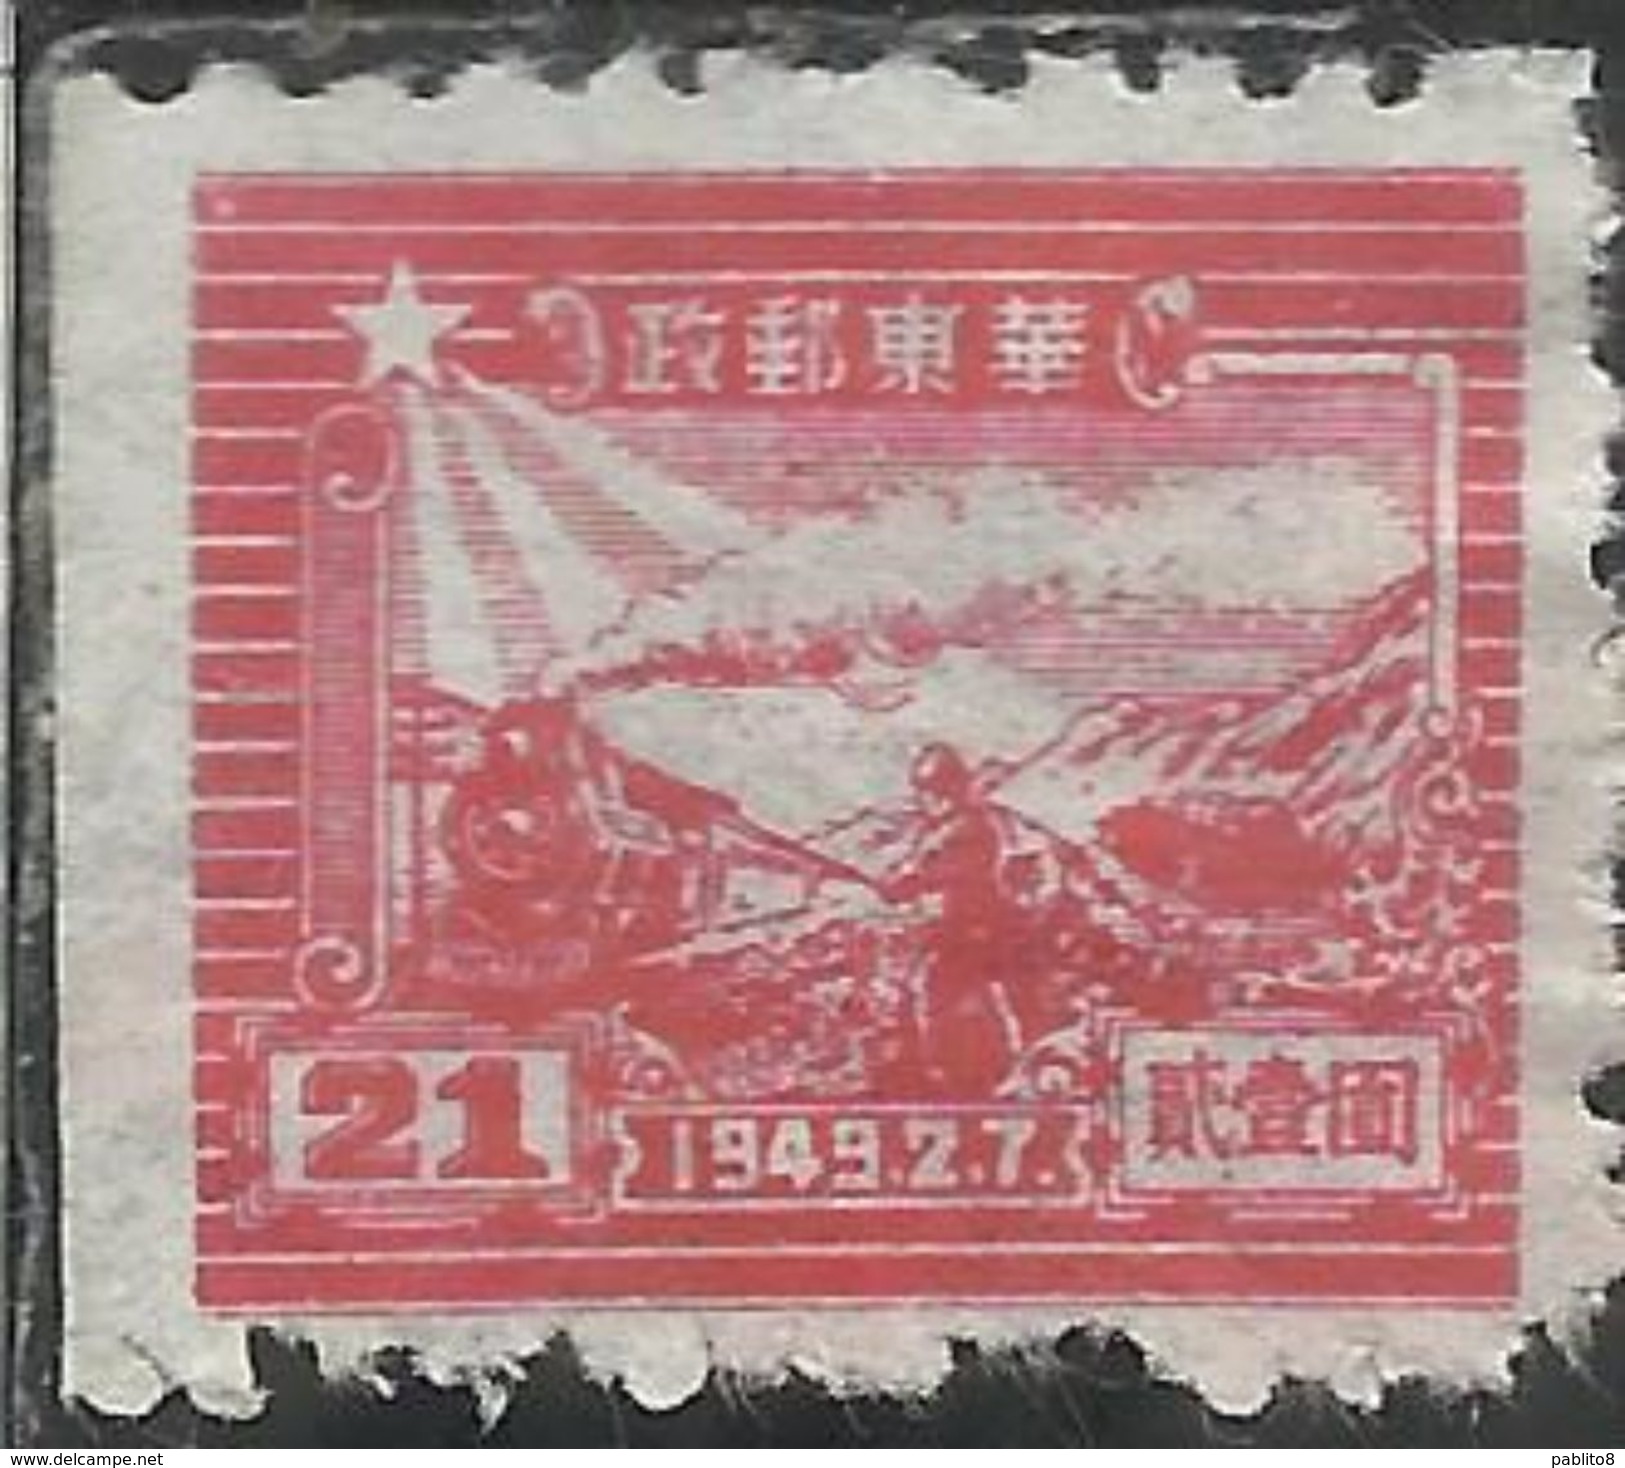 EAST CHINA CINA ORIENTALE 1949 TRAIN AND POSTAL RUNNER 21$ NG - Chine Orientale 1949-50